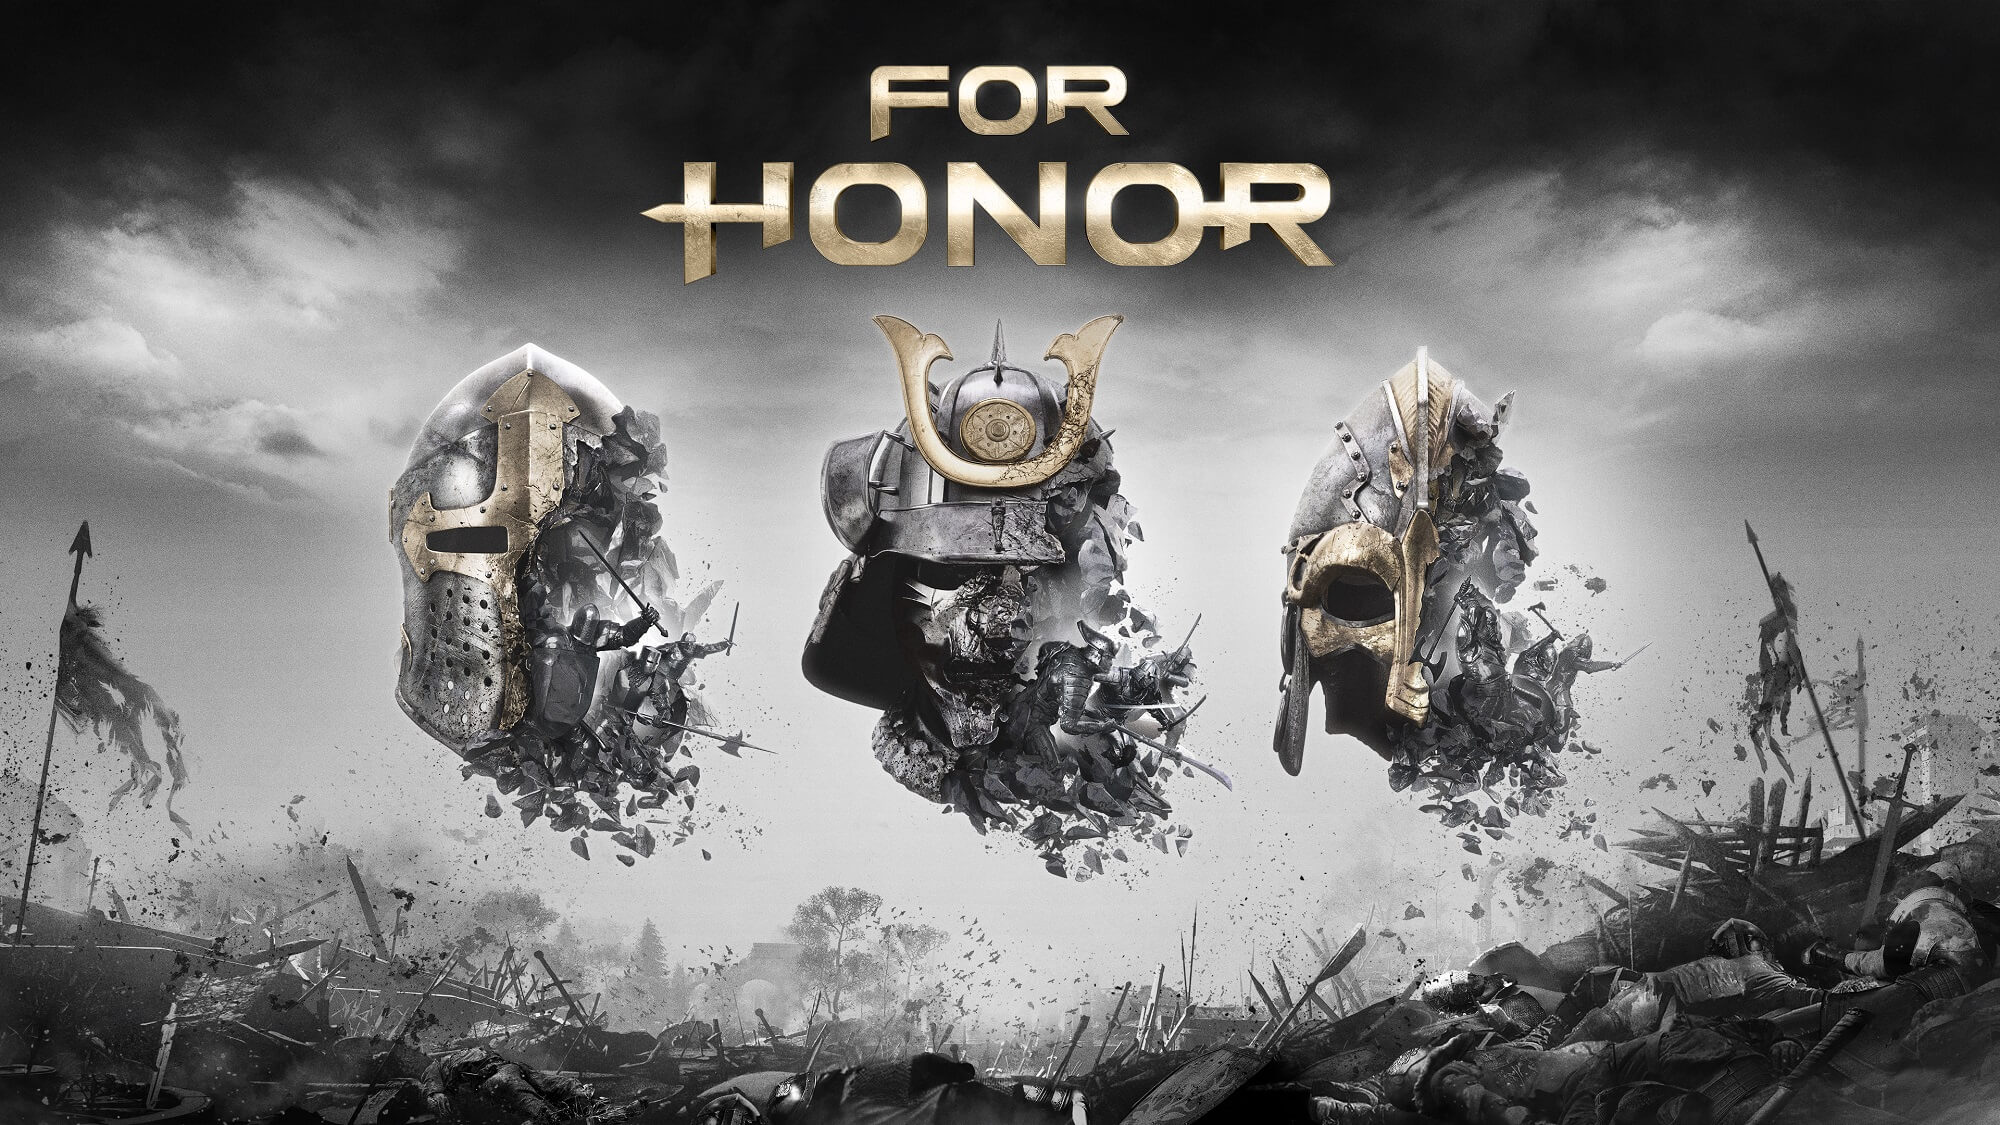 Marketing cover photo for For Honor showing a samurai, knight and viking behind the logo type